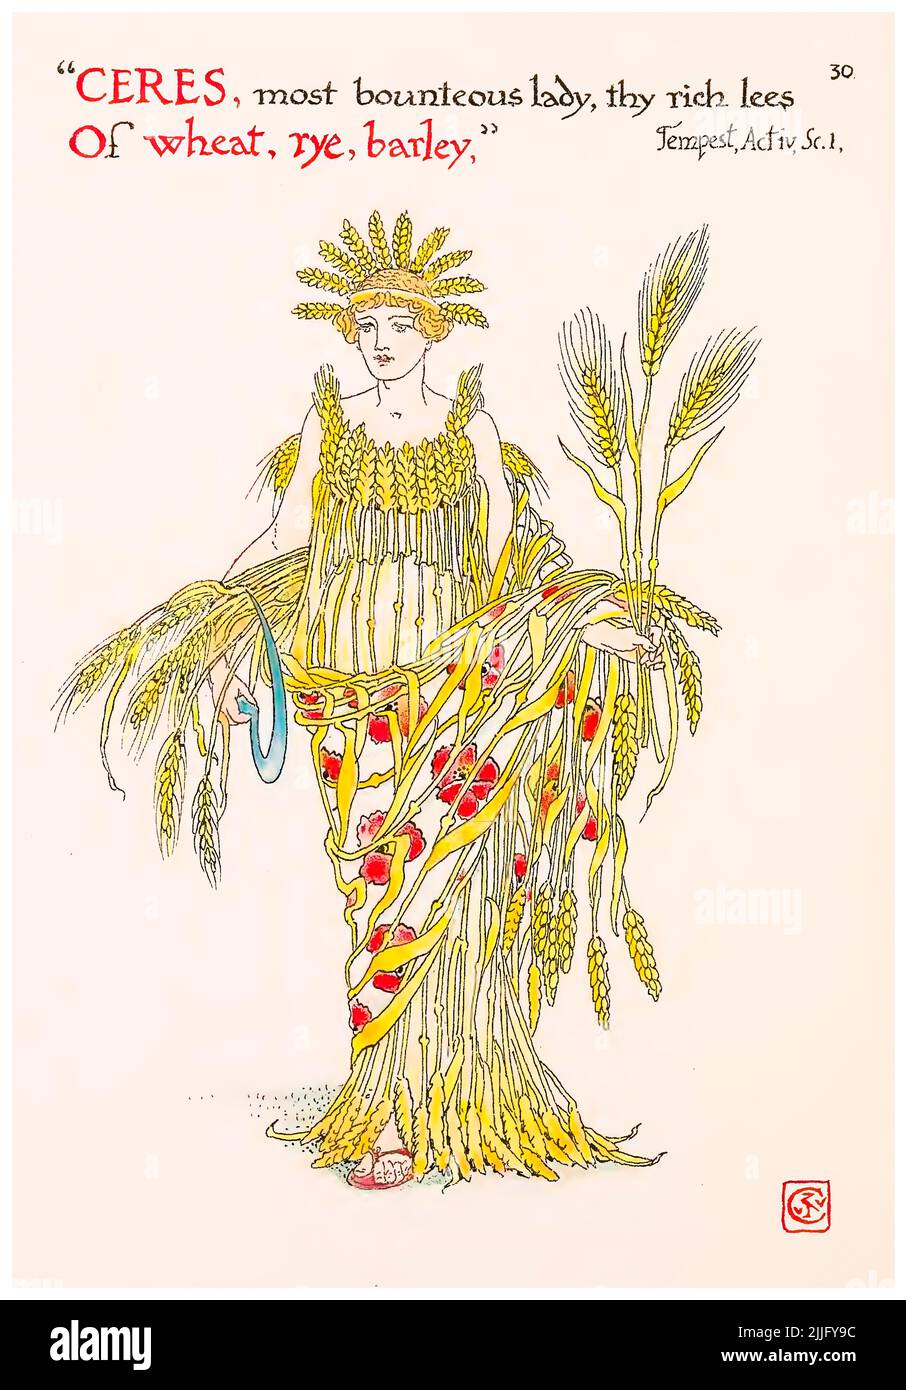 Wheat, Rye, and Barley (Ceres) from the illustrated book 'Flowers from Shakespeare's garden', illustration by Walter Crane, 1909 Stock Photo